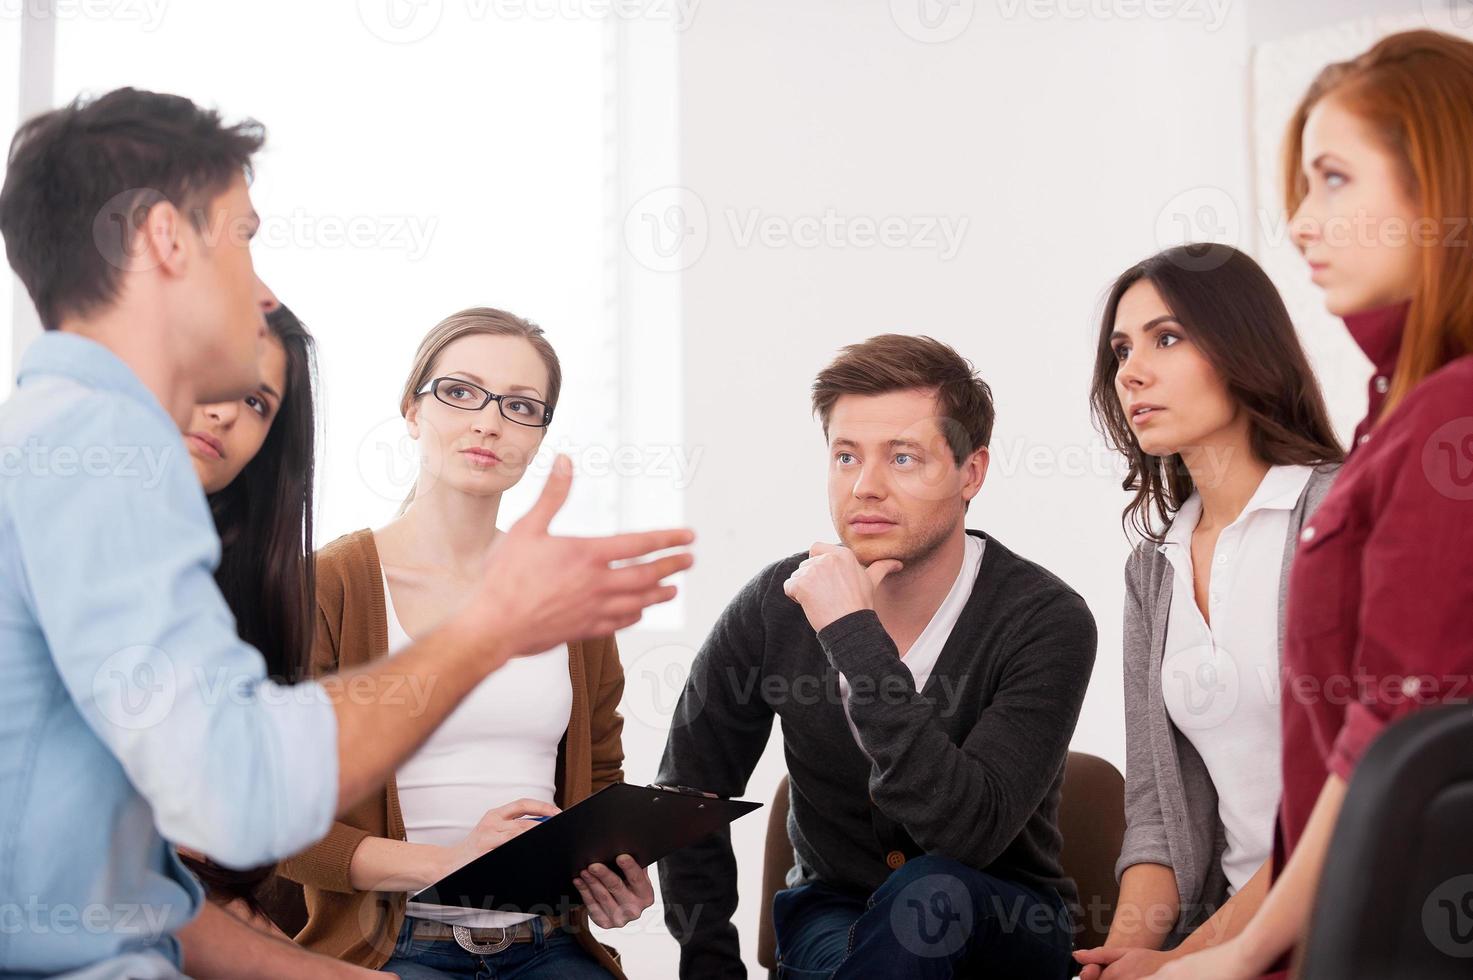 I want to share my problem. Group of people sitting close to each other while man telling something and gesturing photo